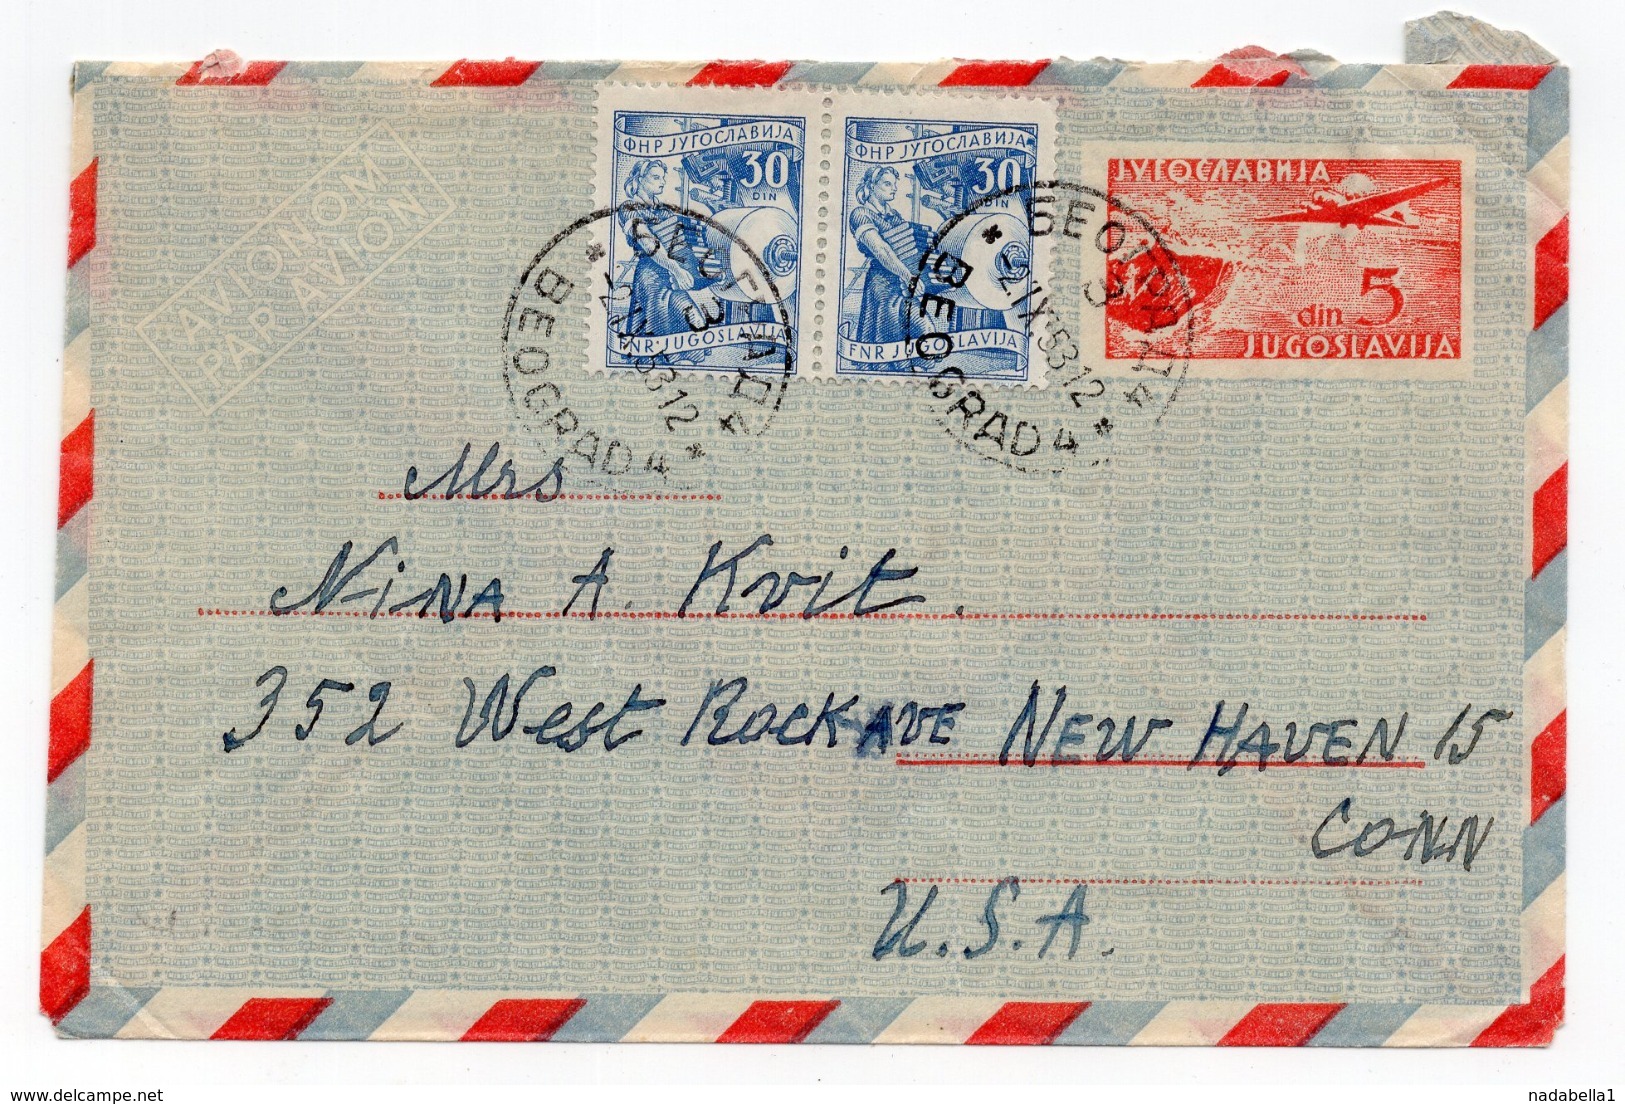 1953 YUGOSLAVIA, SERBIA, BELGRADE TO NEW HAVEN, USA, AIR MAIL - Covers & Documents